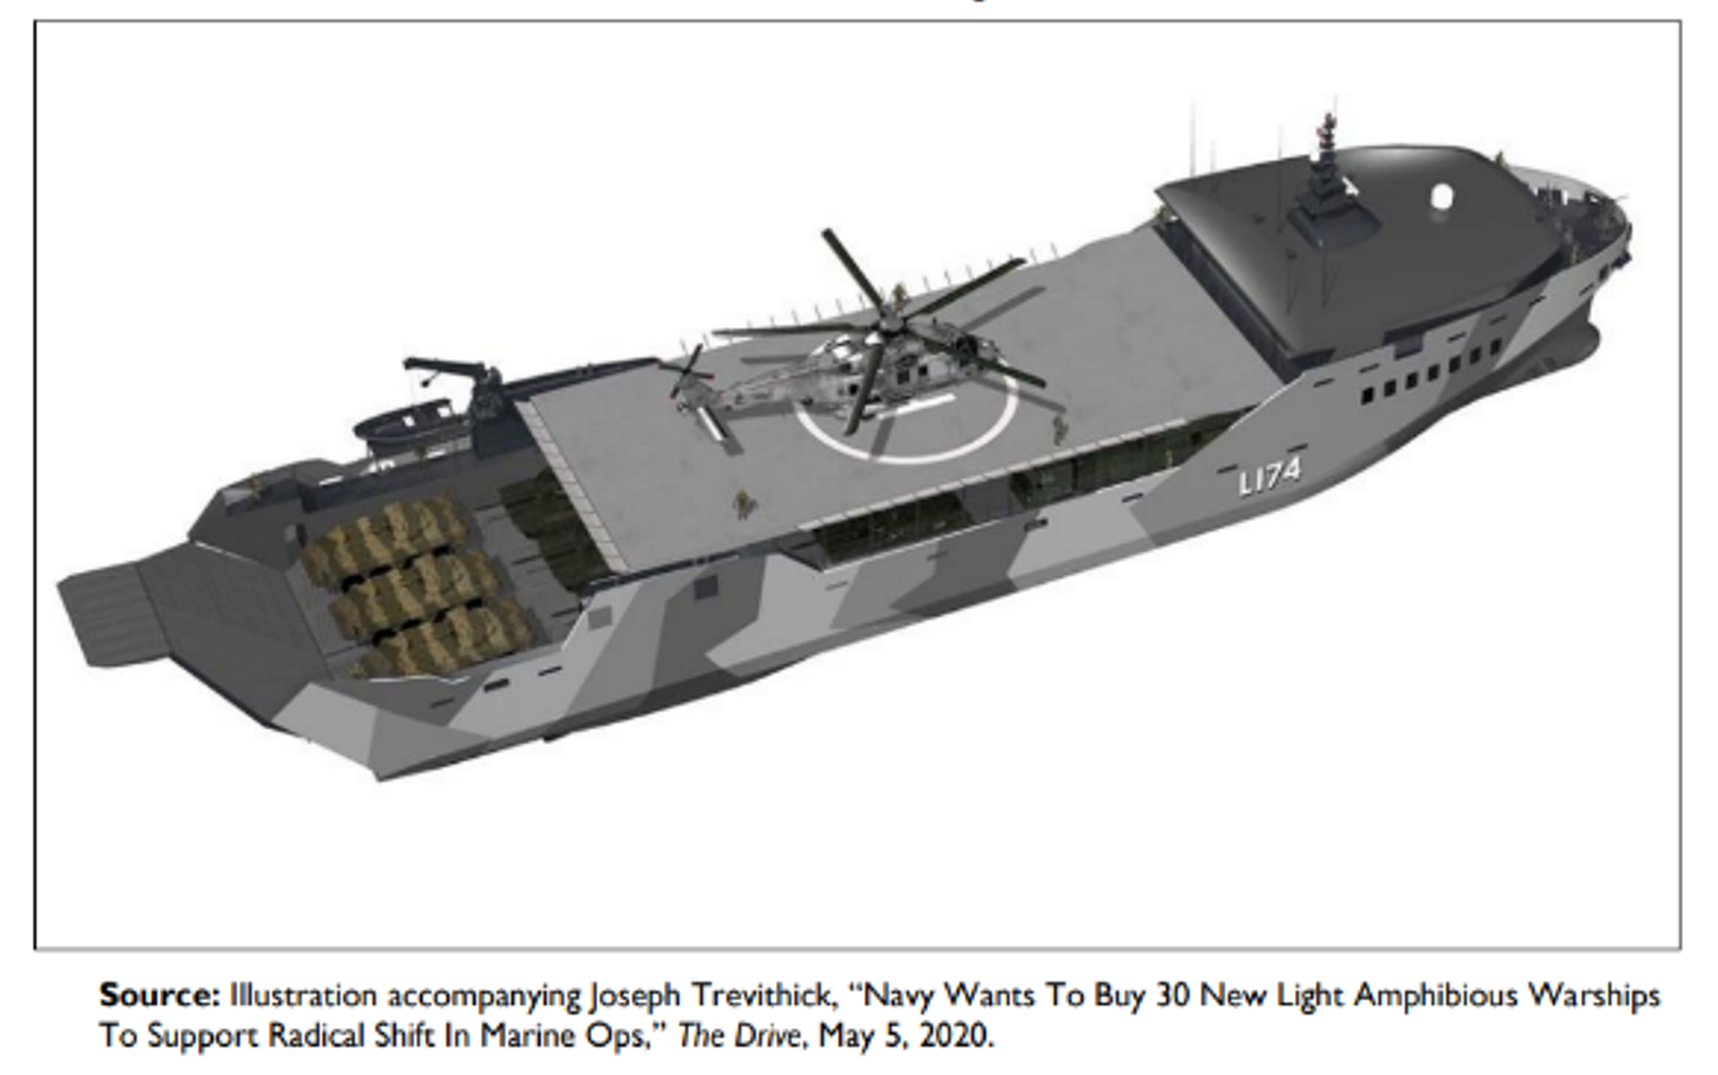 Source: Illustration accompanying Joseph Trevithick, “Navy Wants To Buy 30 New Light Amphibious Warships To Support Radical Shift In Marine Ops,” The Drive, May 5, 2020.